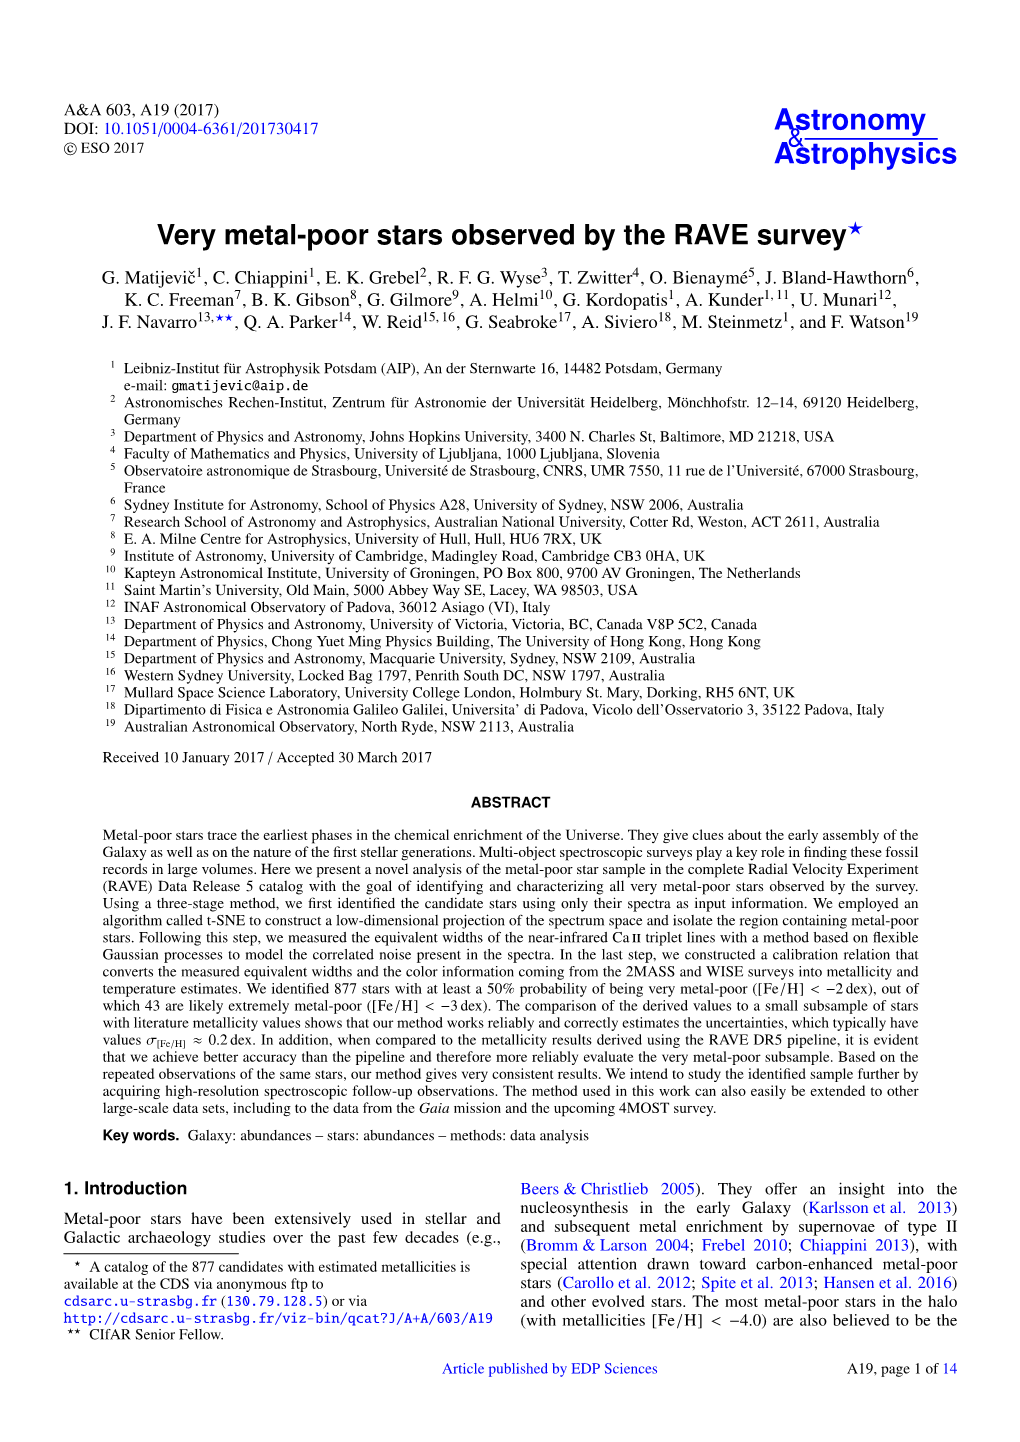 Very Metal-Poor Stars Observed by the RAVE Survey? G